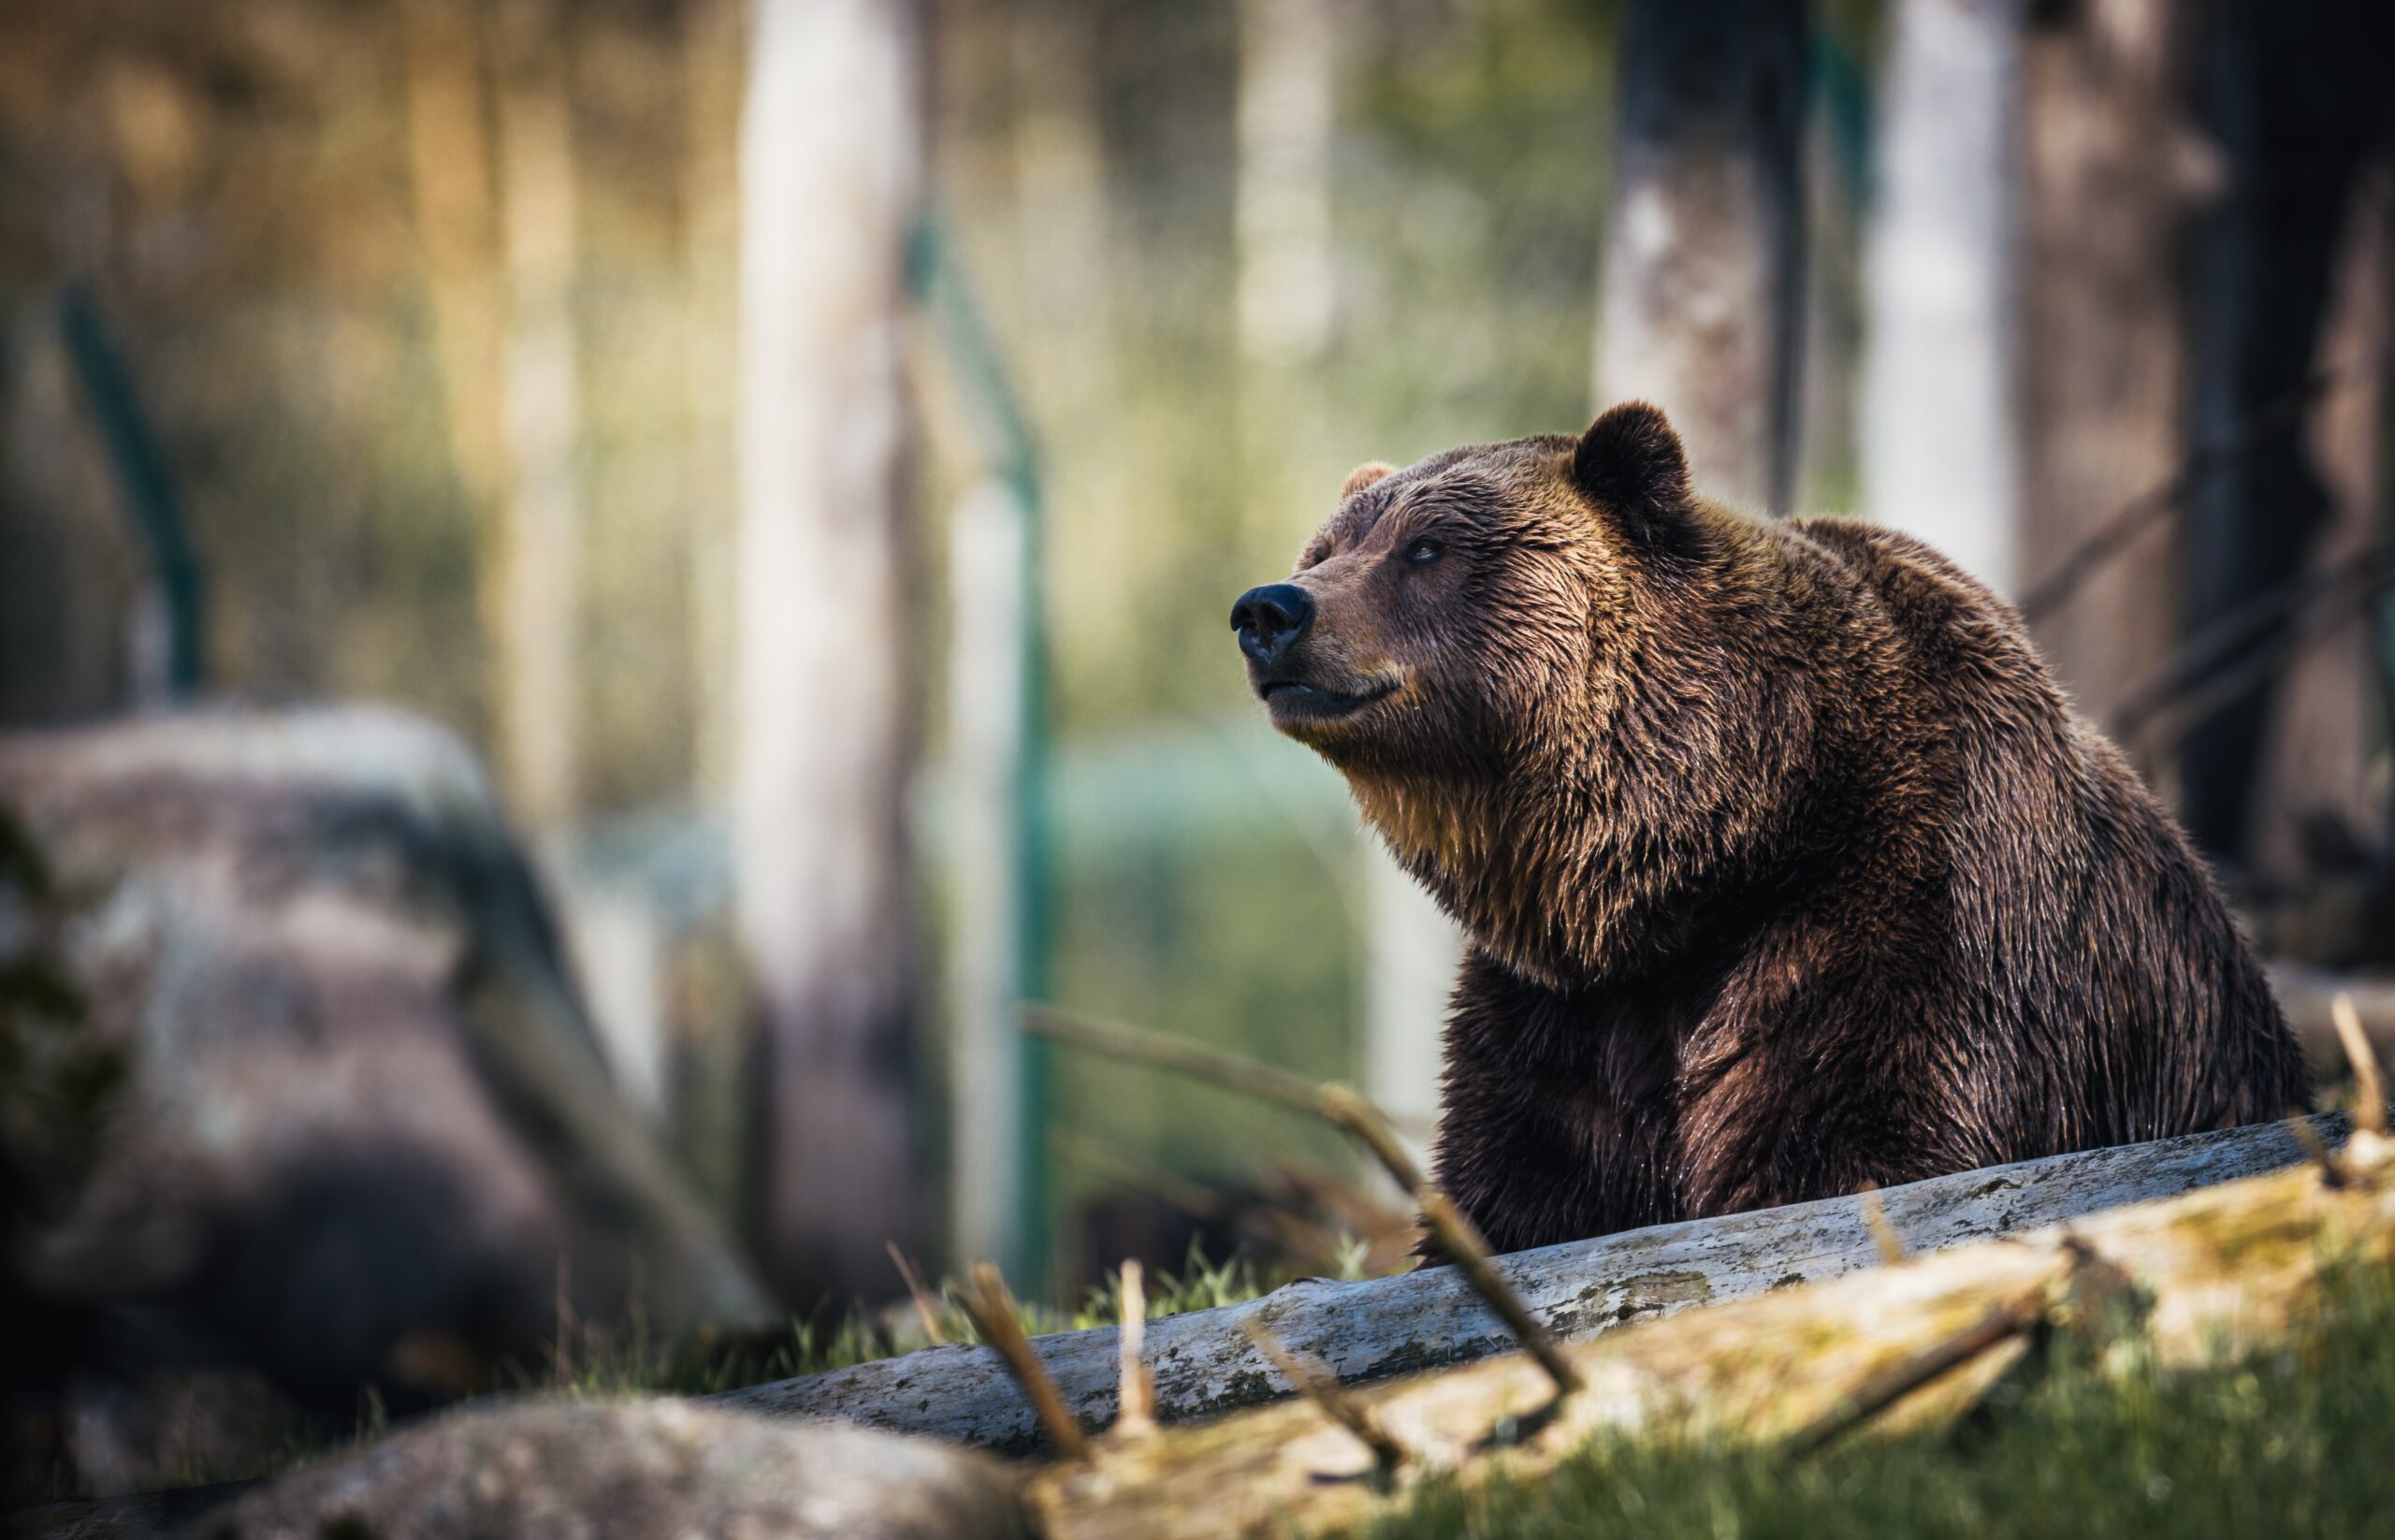 proforestation: A brown bear rests in a forest